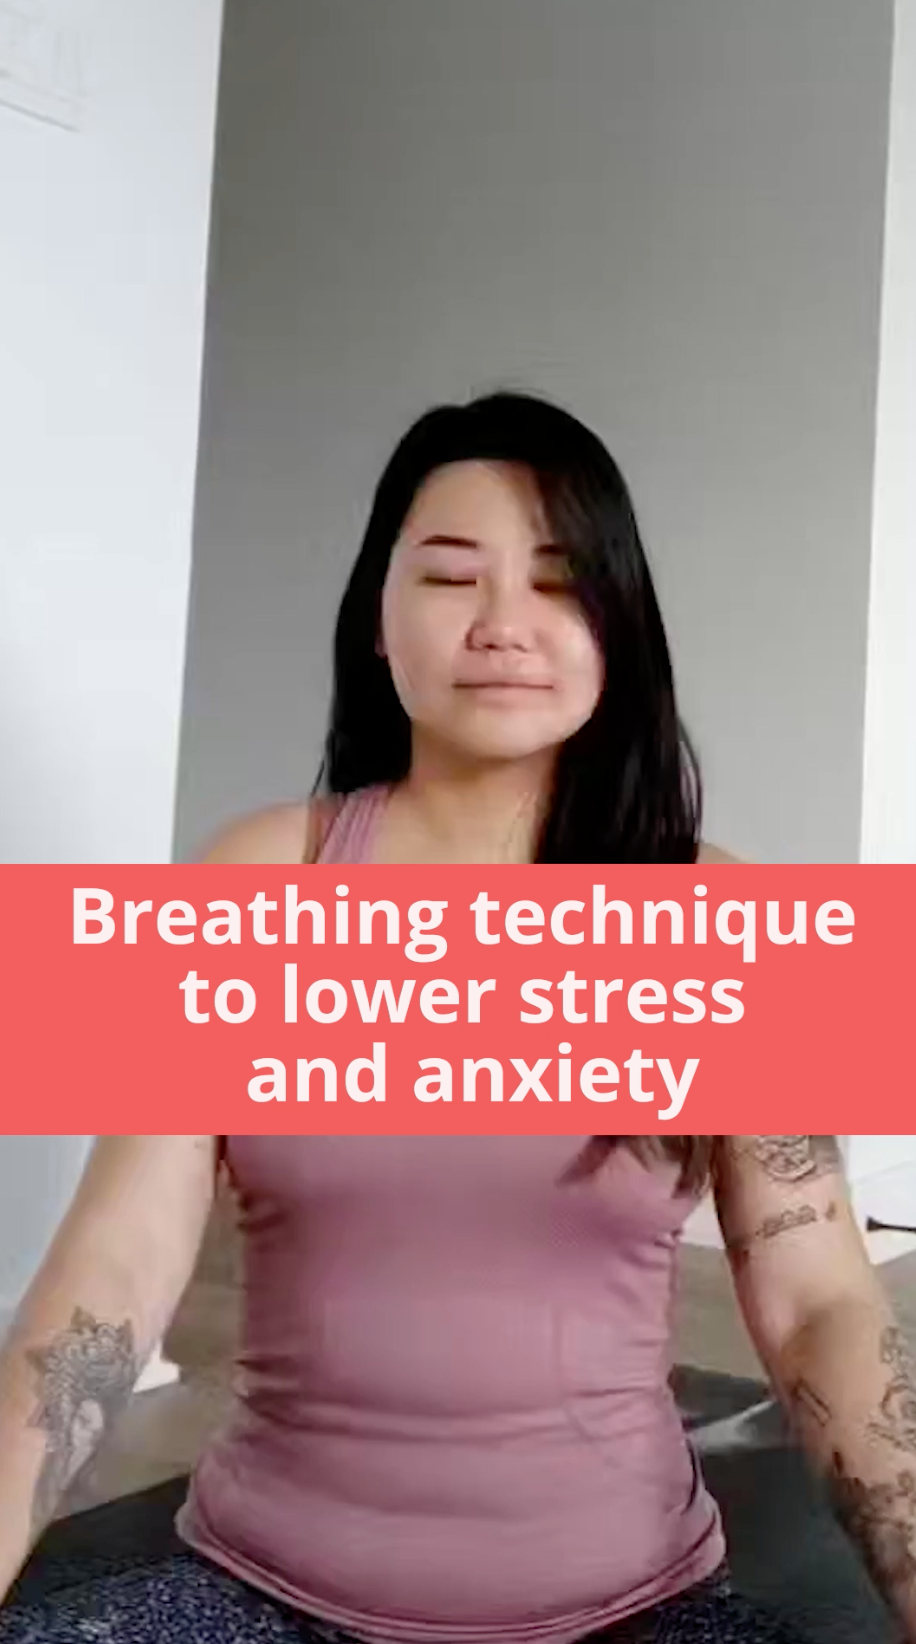 Breathing technique to lower stress and anxiety